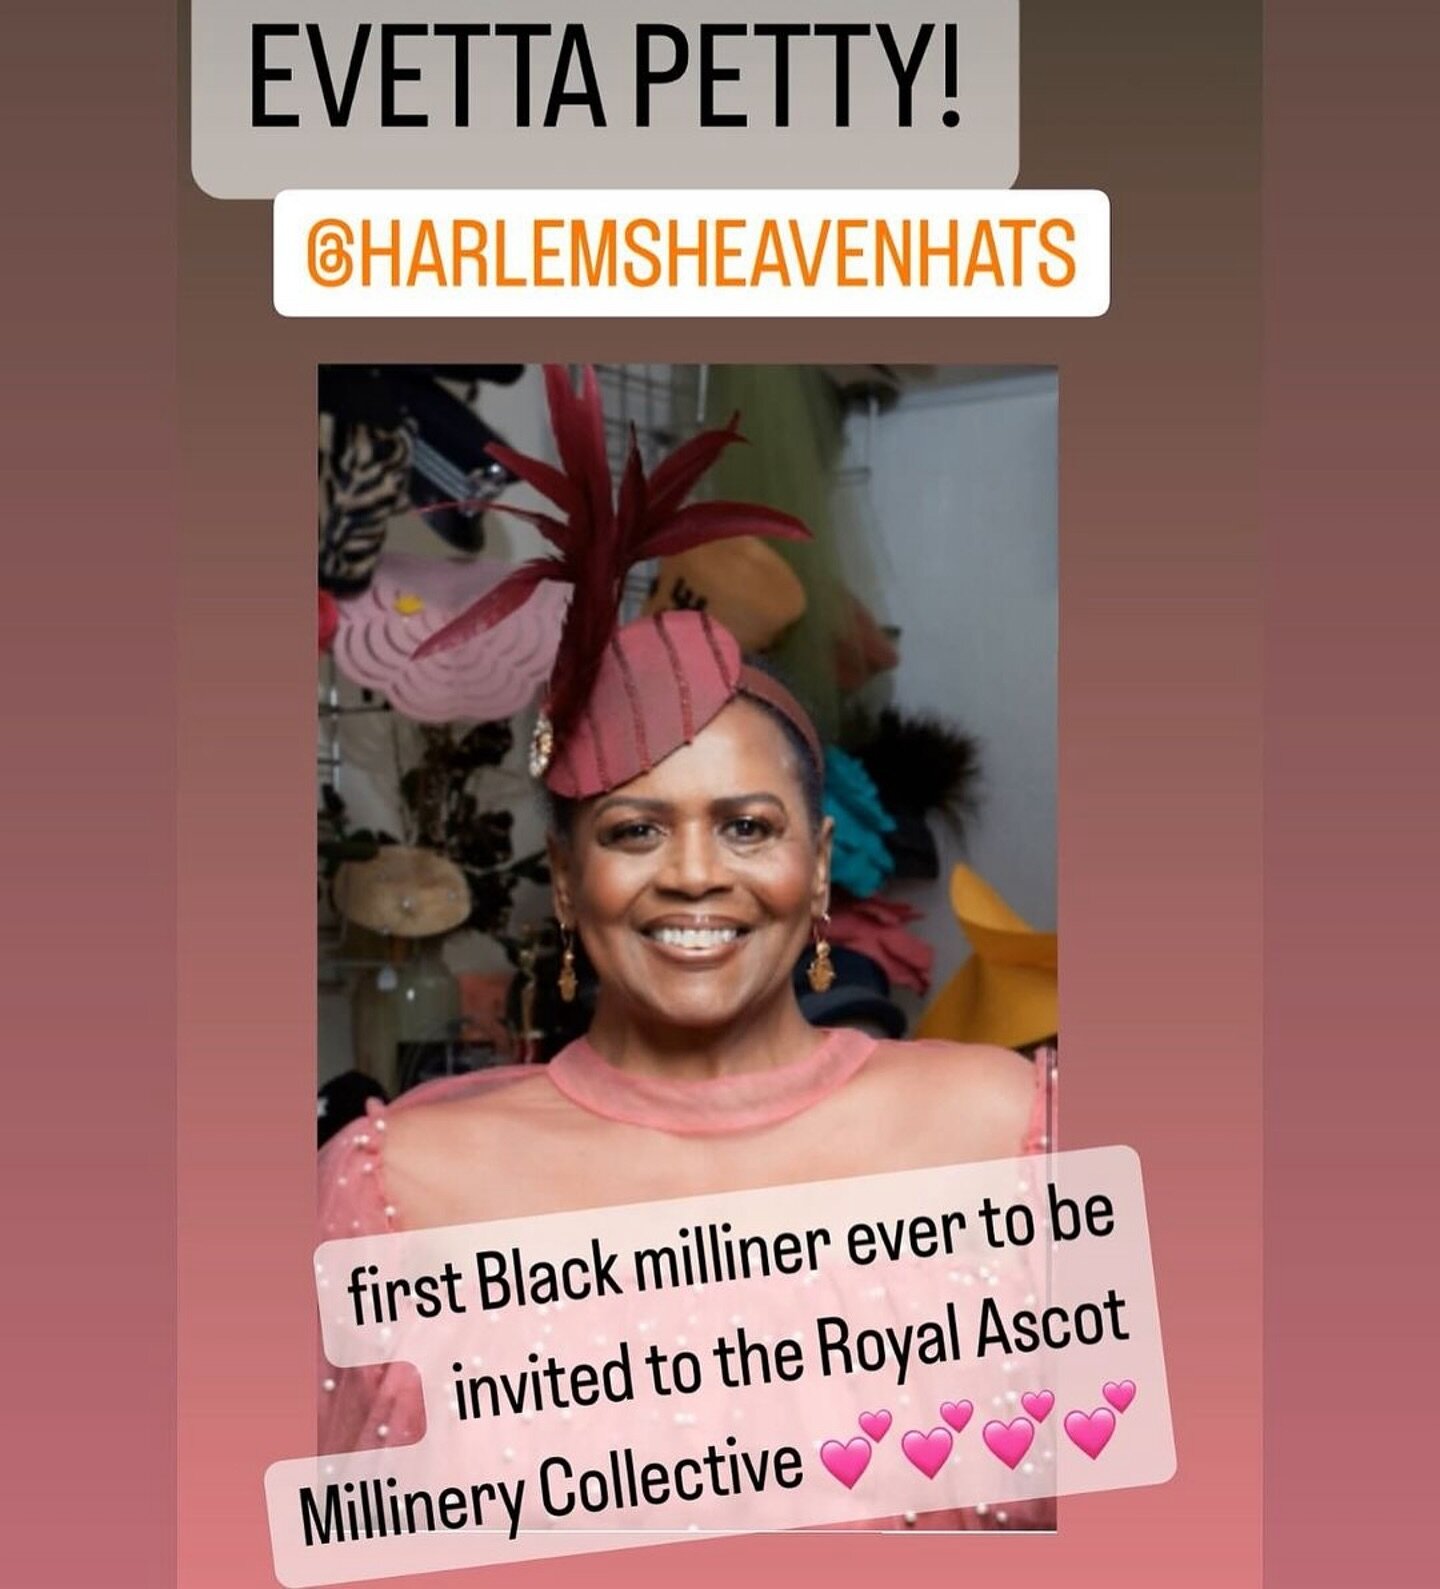 The first black milliner in the history of The Royal Ascot millinery Collective invited this year is our lovely member @harlemsheavenhats 
Congratulations Evetta 🎉👒

#Repost @harlemsheavenhats
・・・
I&rsquo;ve been invited to participate in The ROYAL